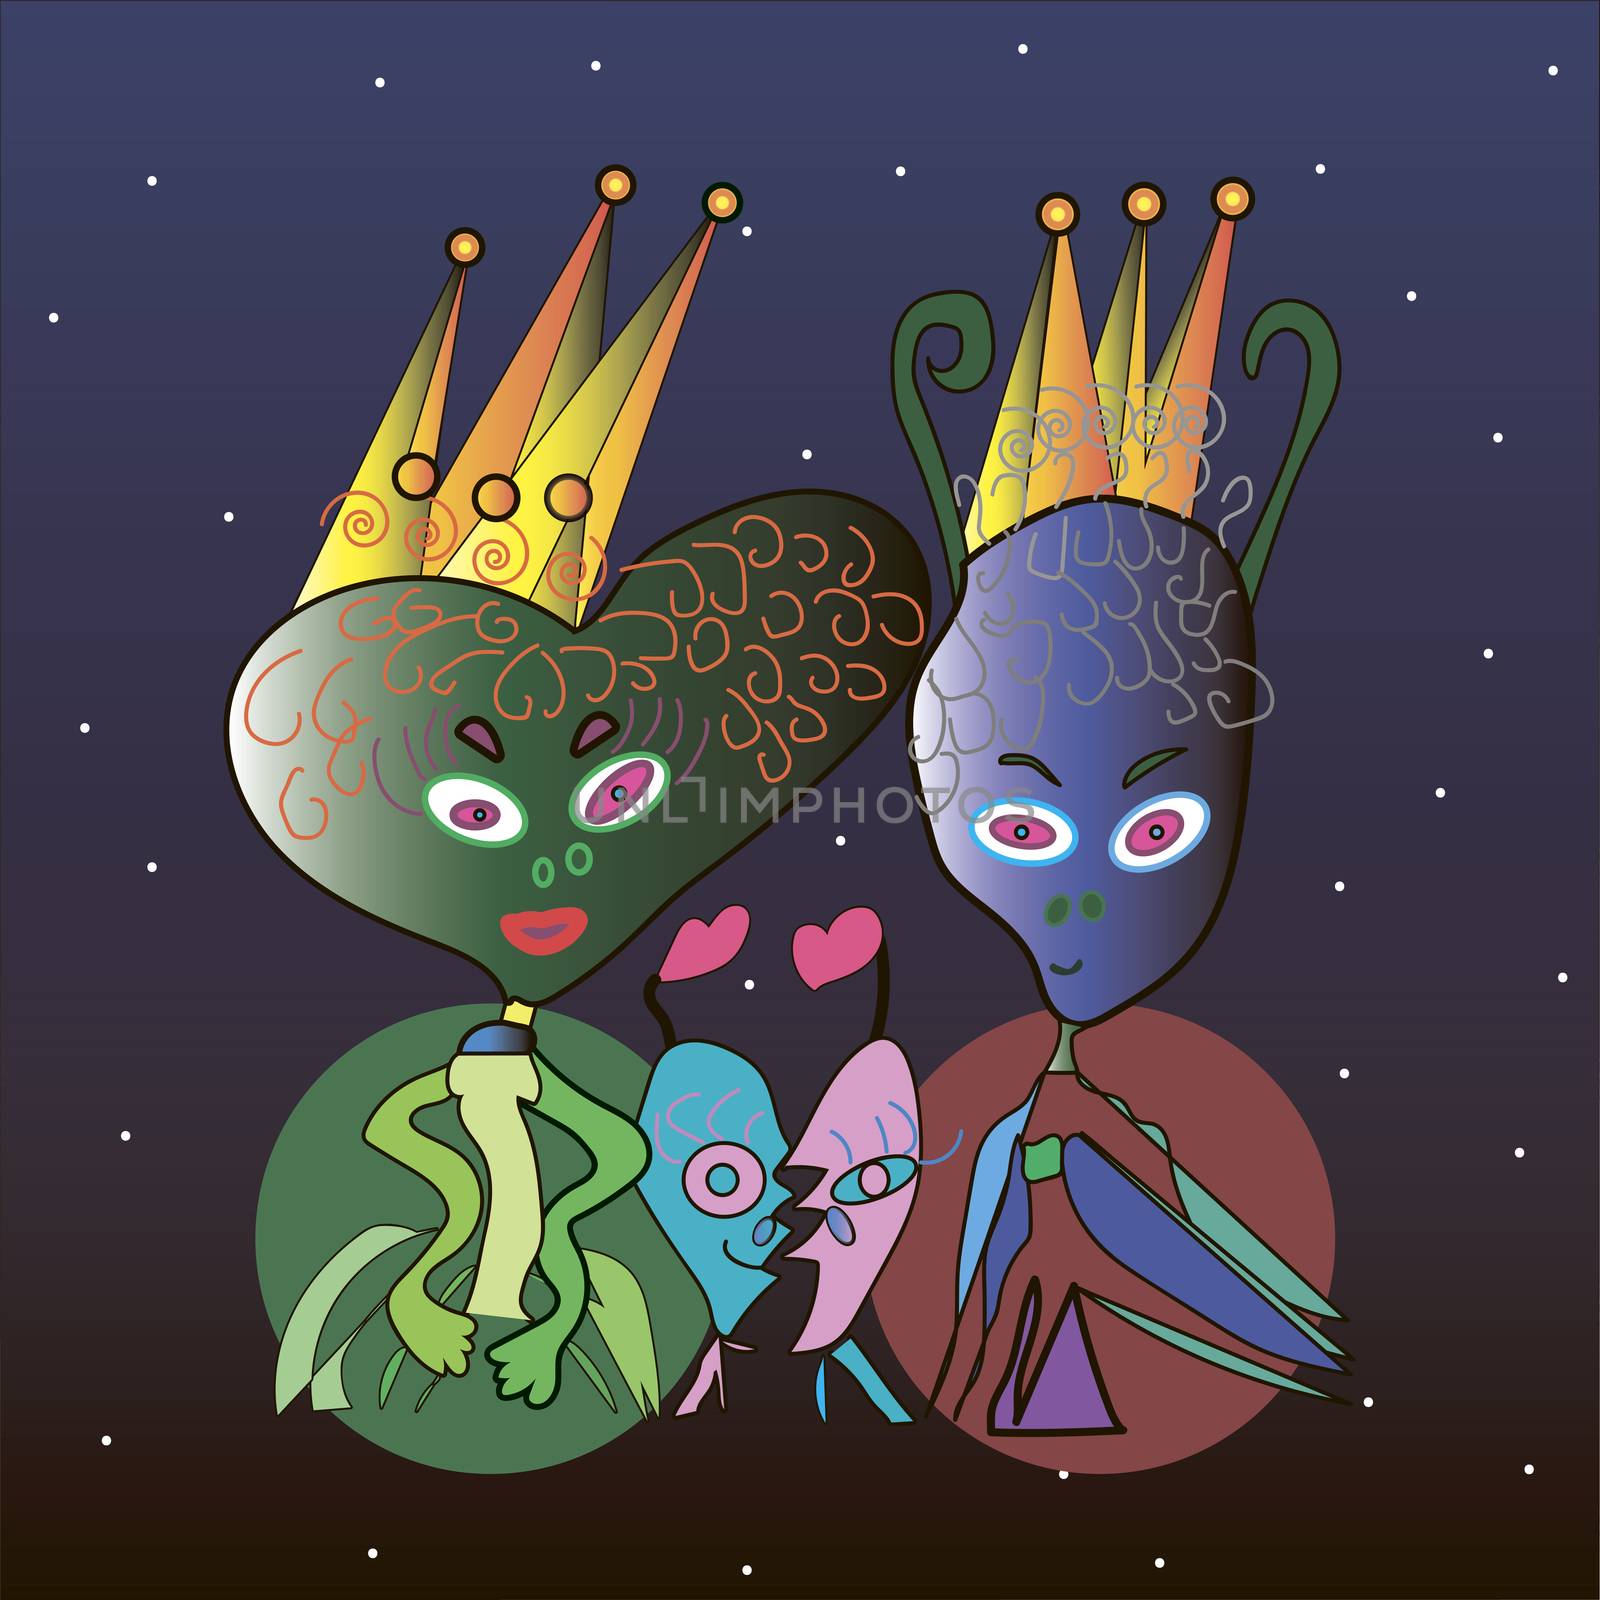 The Space Royal Family - JPEG illustration by gstalker